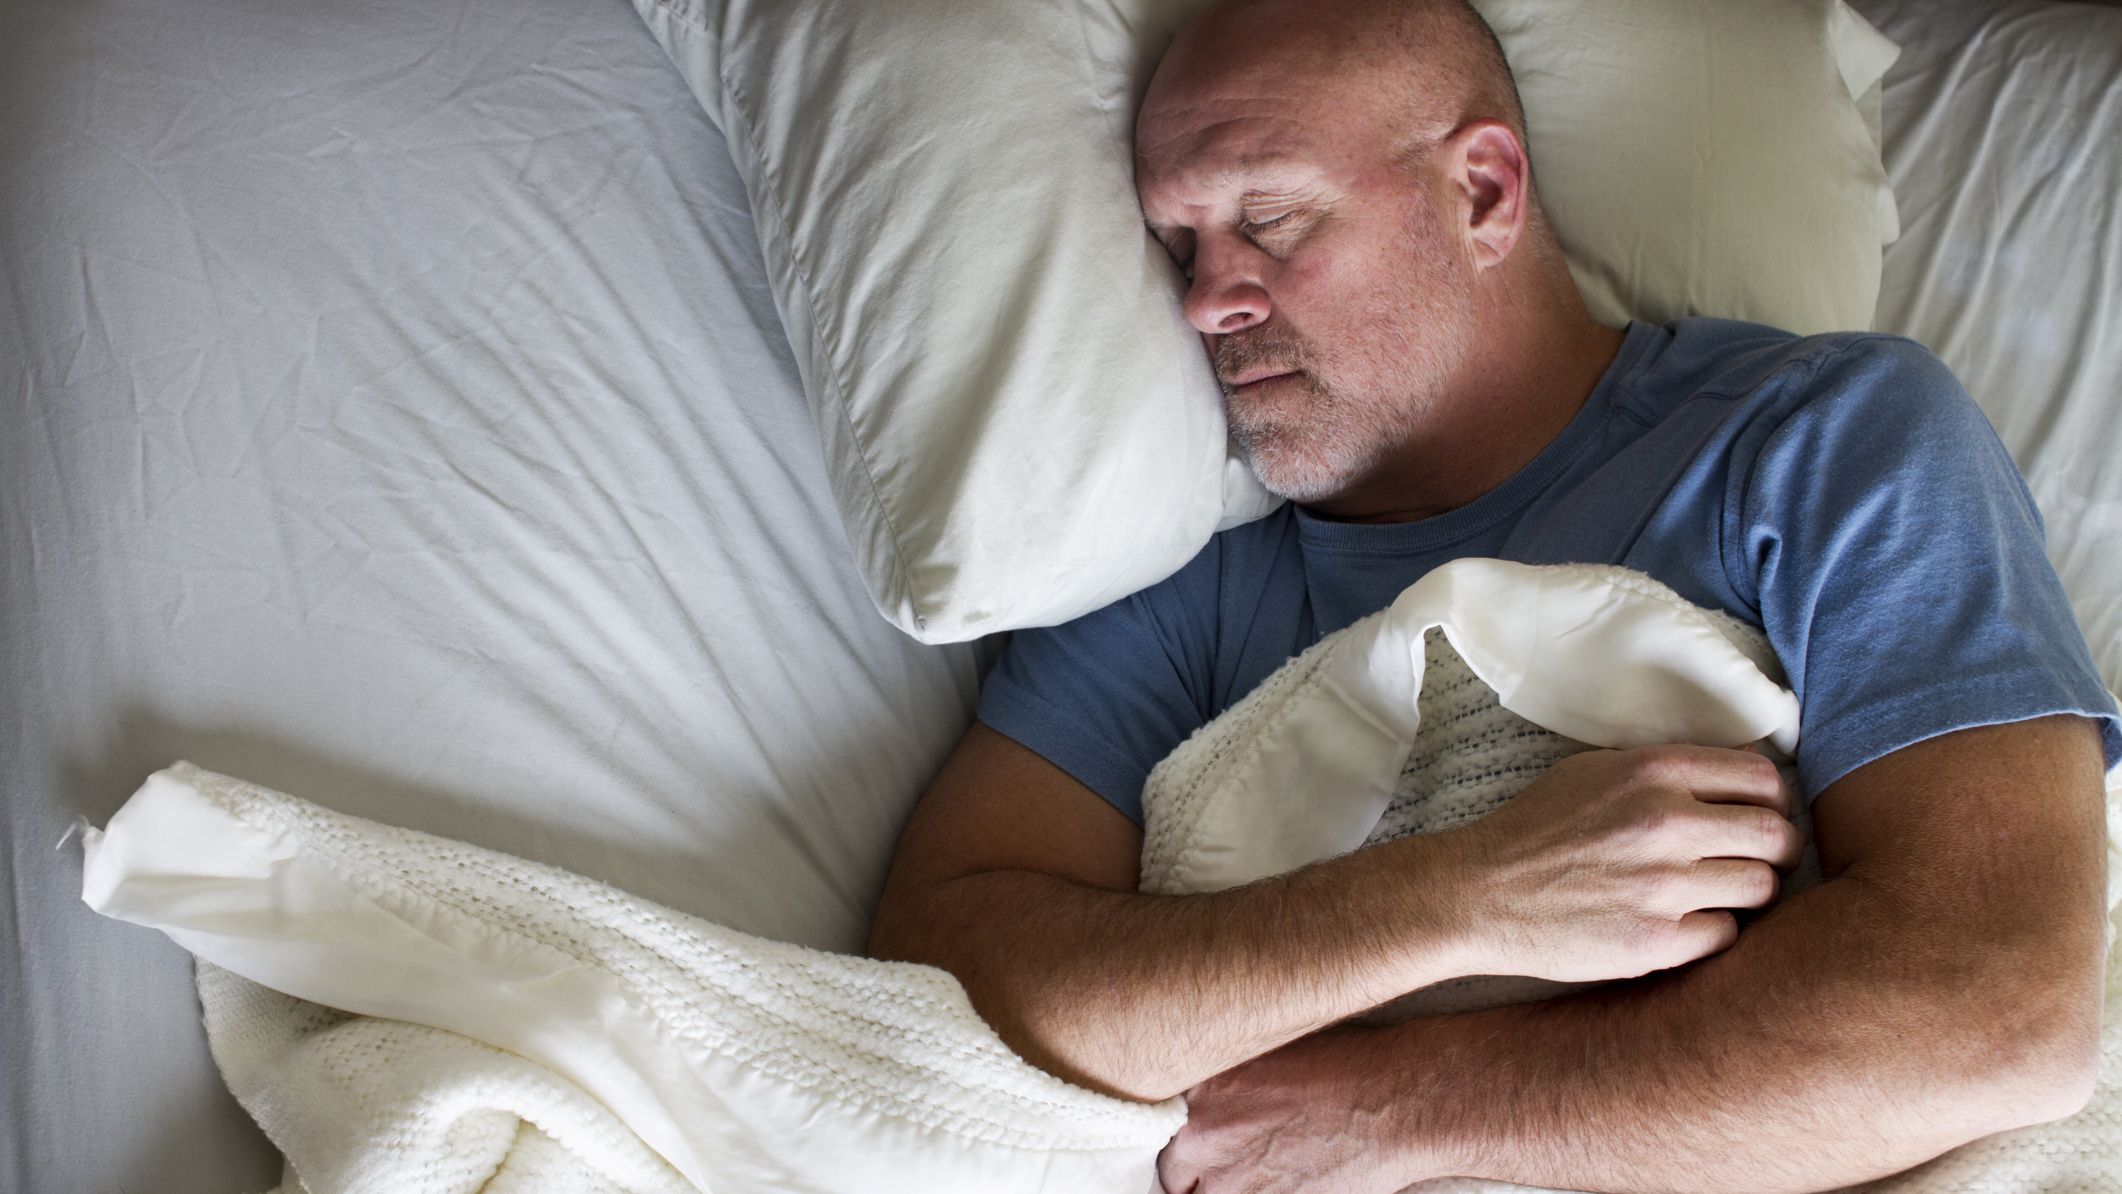 How does insomnia cause obesity?